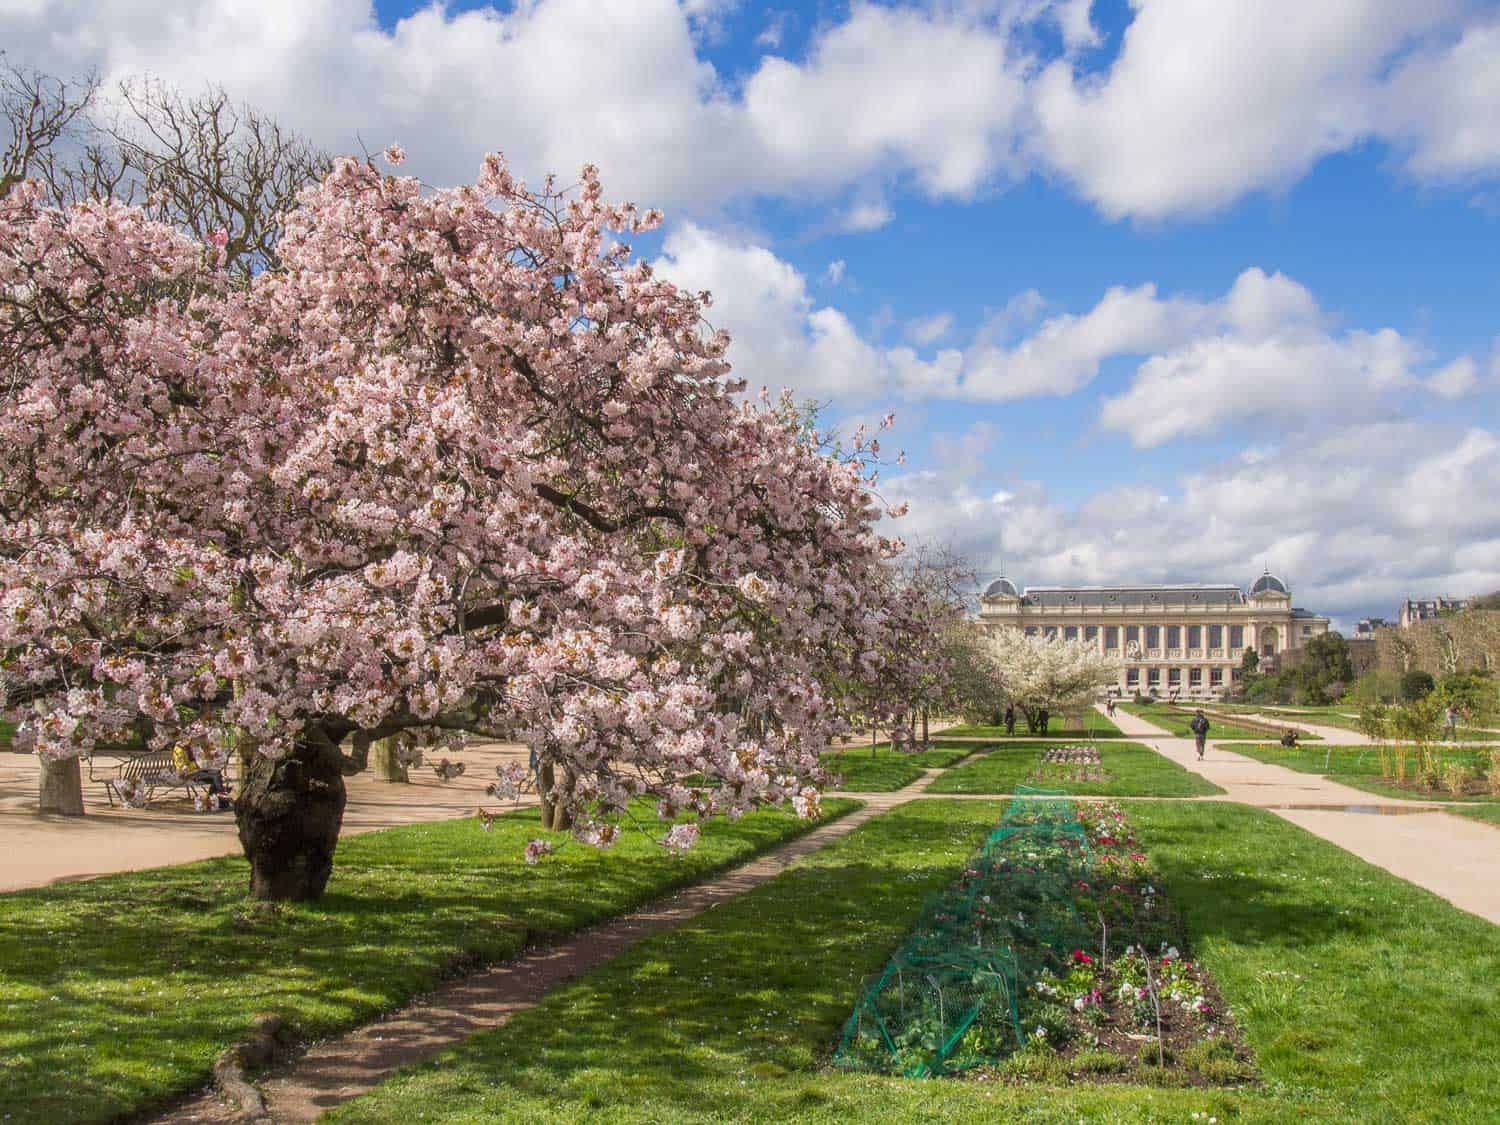 Cherry blossoms in Jardin des Plantes, a stop on our one day in Paris itinerary